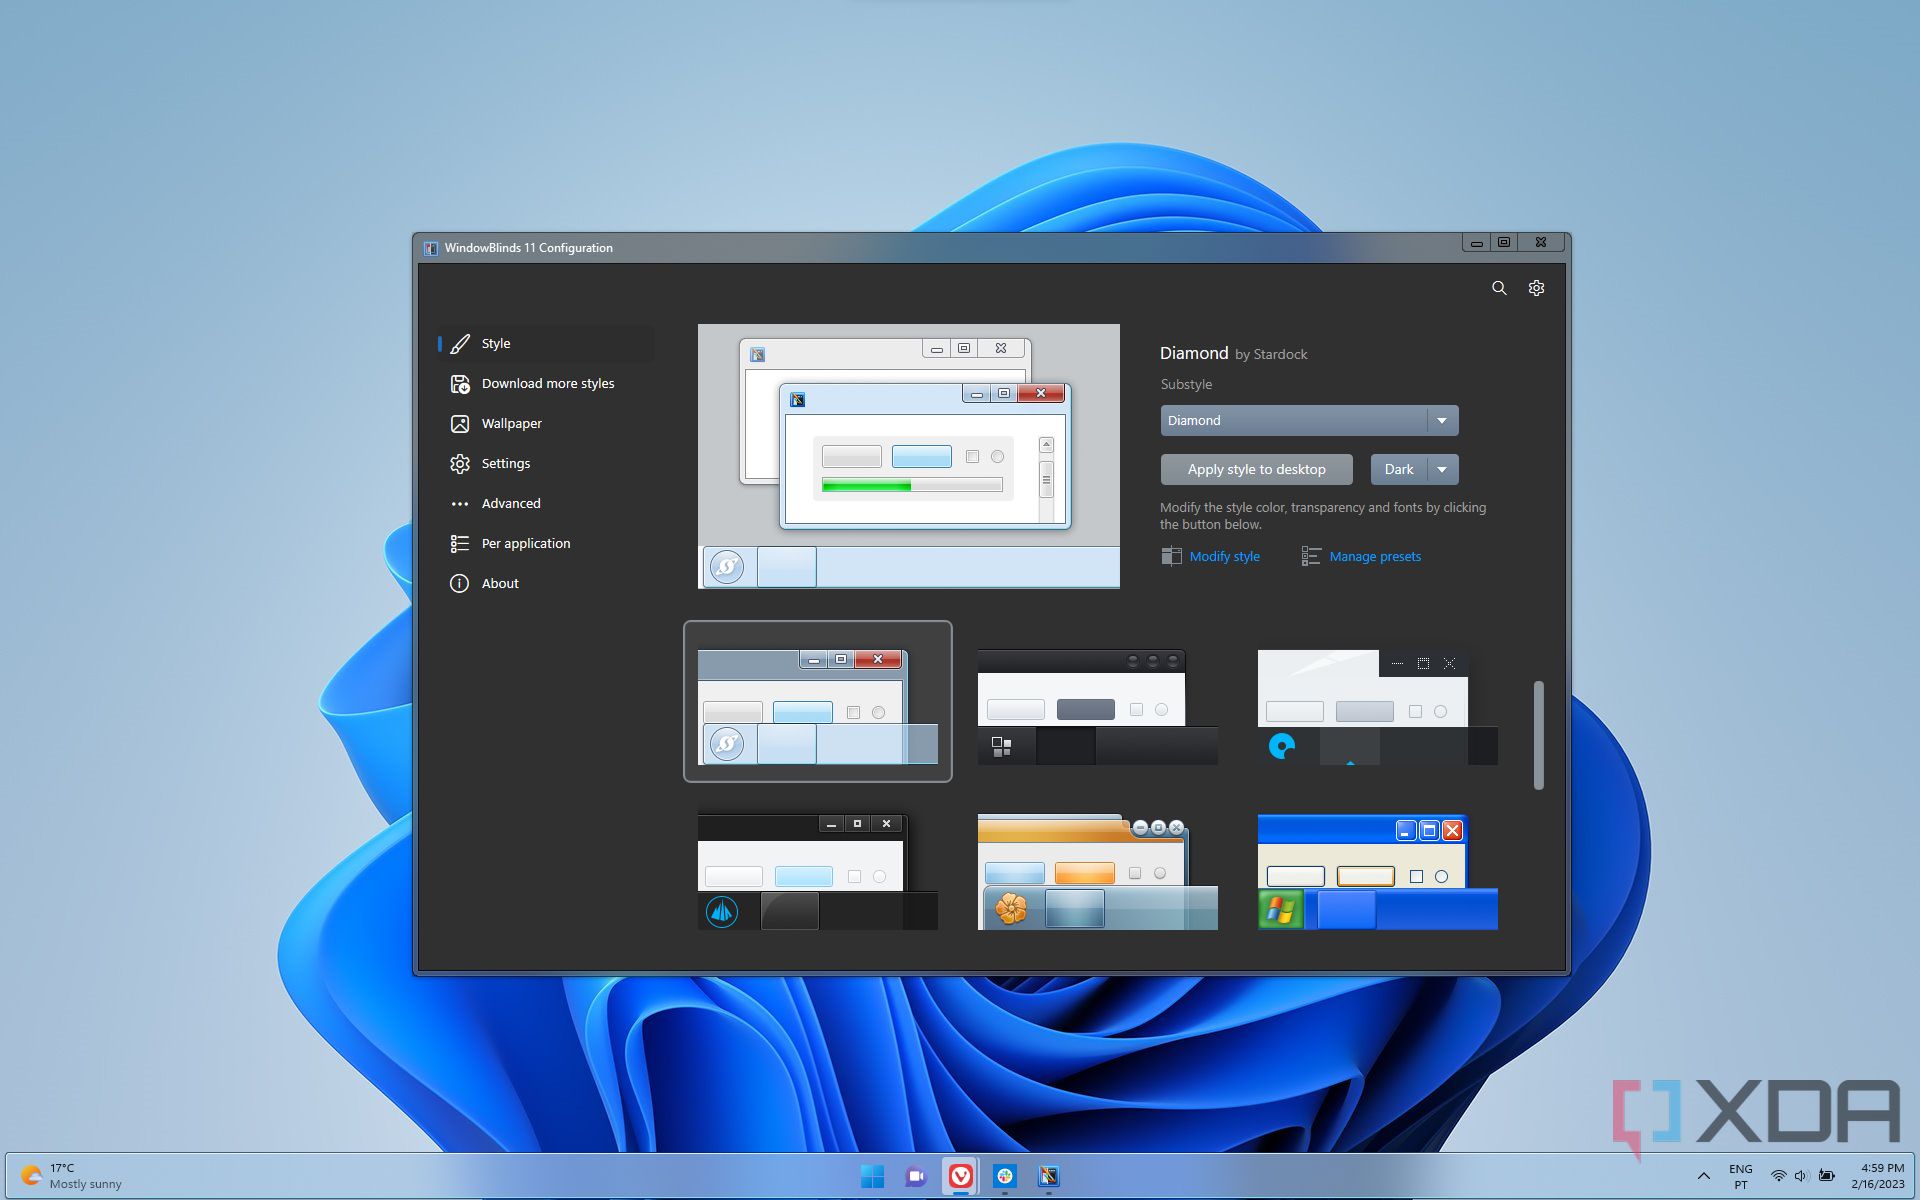 Screenshots of Windows 11 desktop with the Diamond theme from WindowBlinds applied